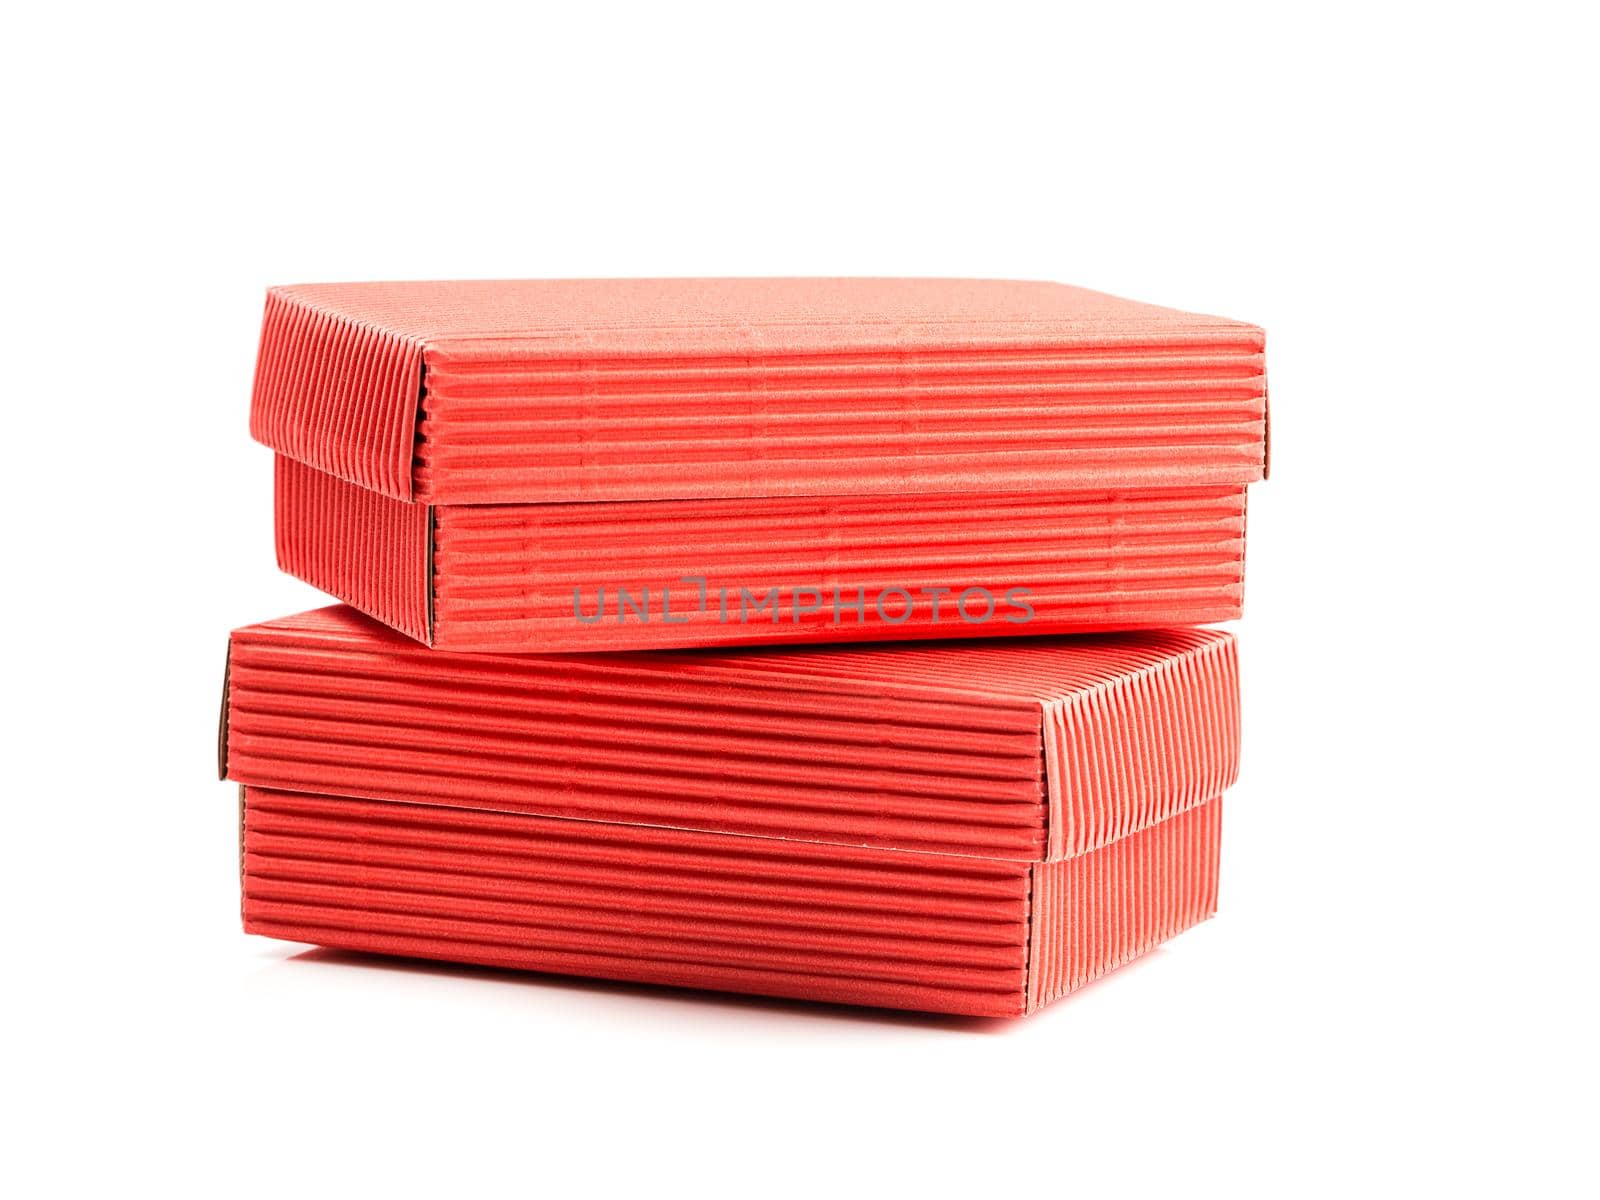 Two red closed corrugated cardboard boxes isolated on white. Valentine's Day gift box packaging concept